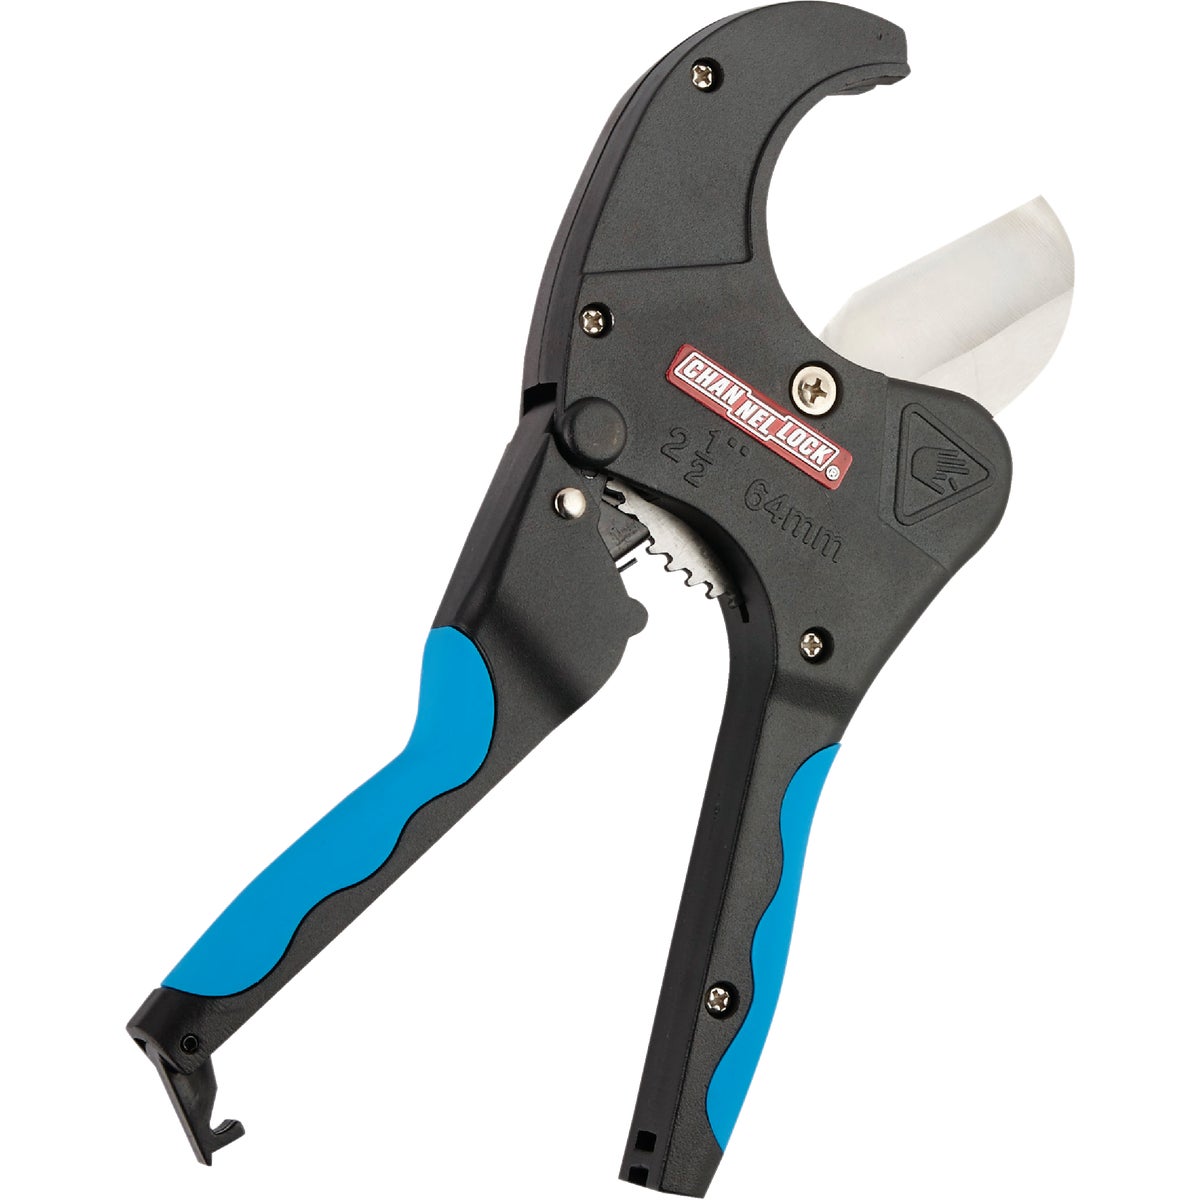 Channellock Up to 2-1/2 In. Ratcheting PVC Plastic Tubing Cutter